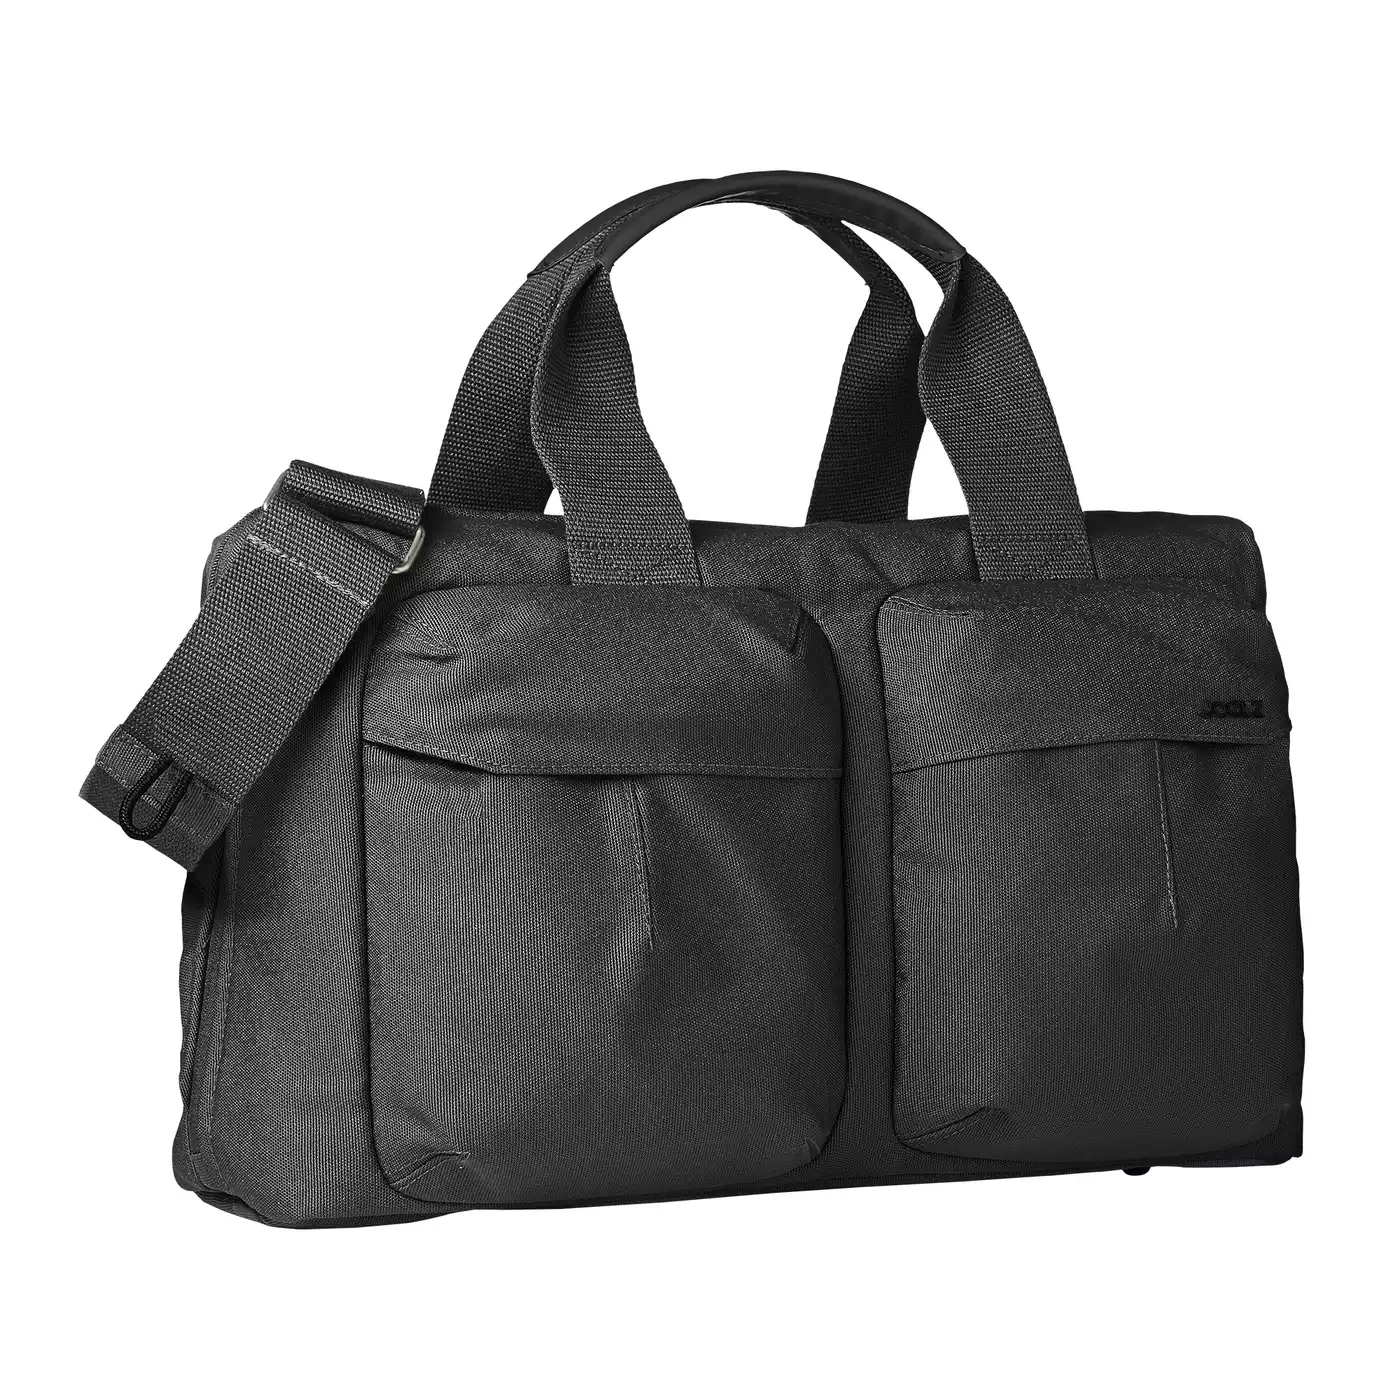 Wickeltasche Awesome Anthracite JOOLZ Anthrazit 2000579009105 1